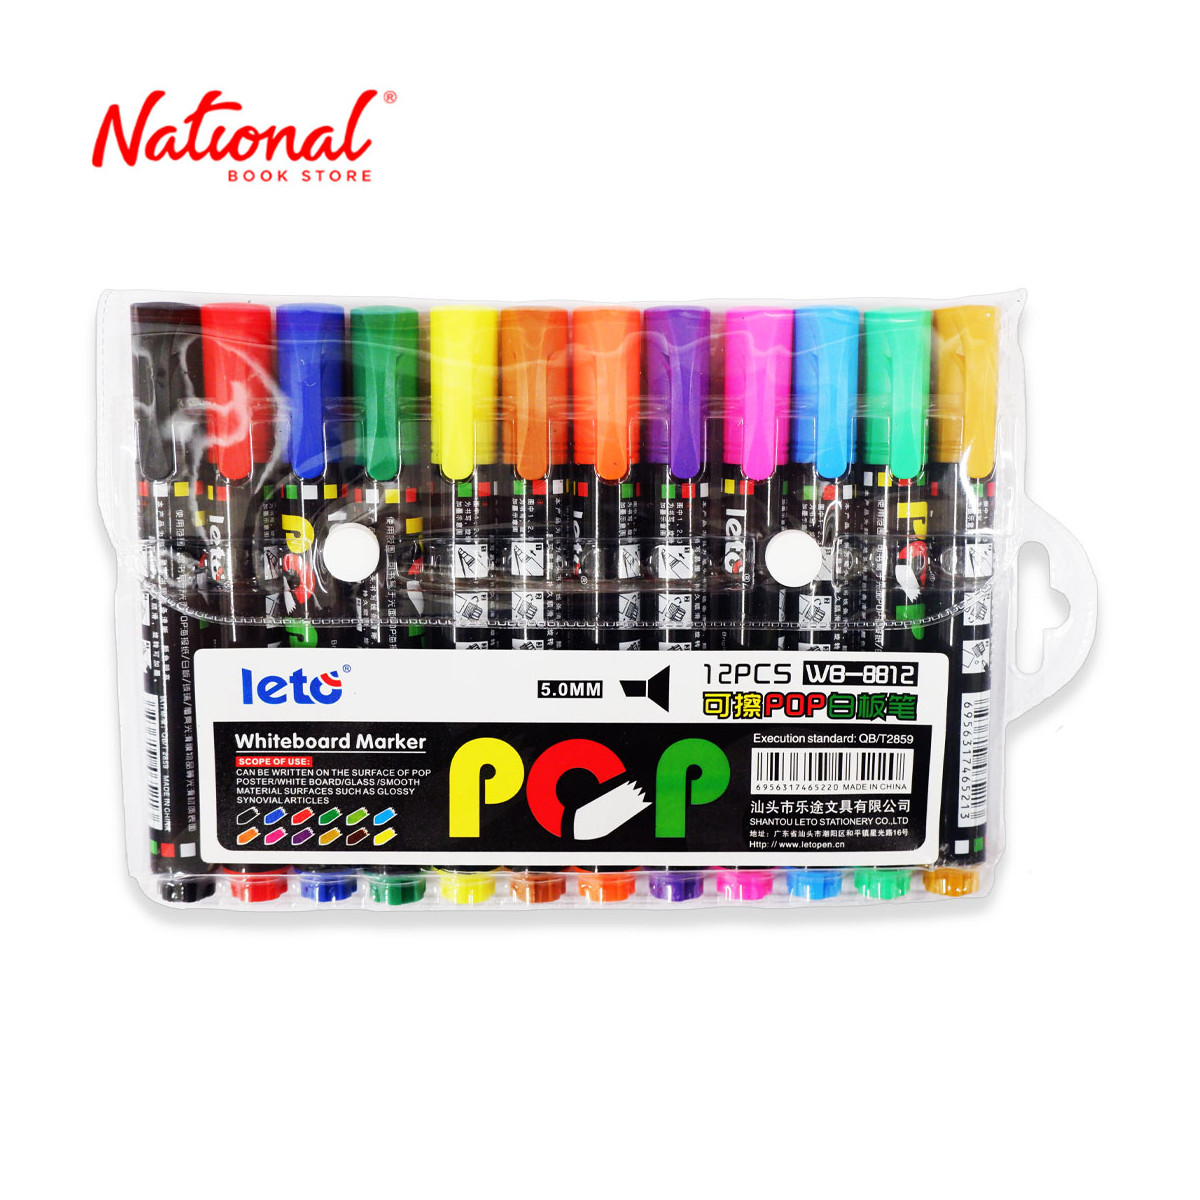 Leto Pop Whiteboard Marker Assorted 12's WB-8812-12 - School & Office - Writing Supplies